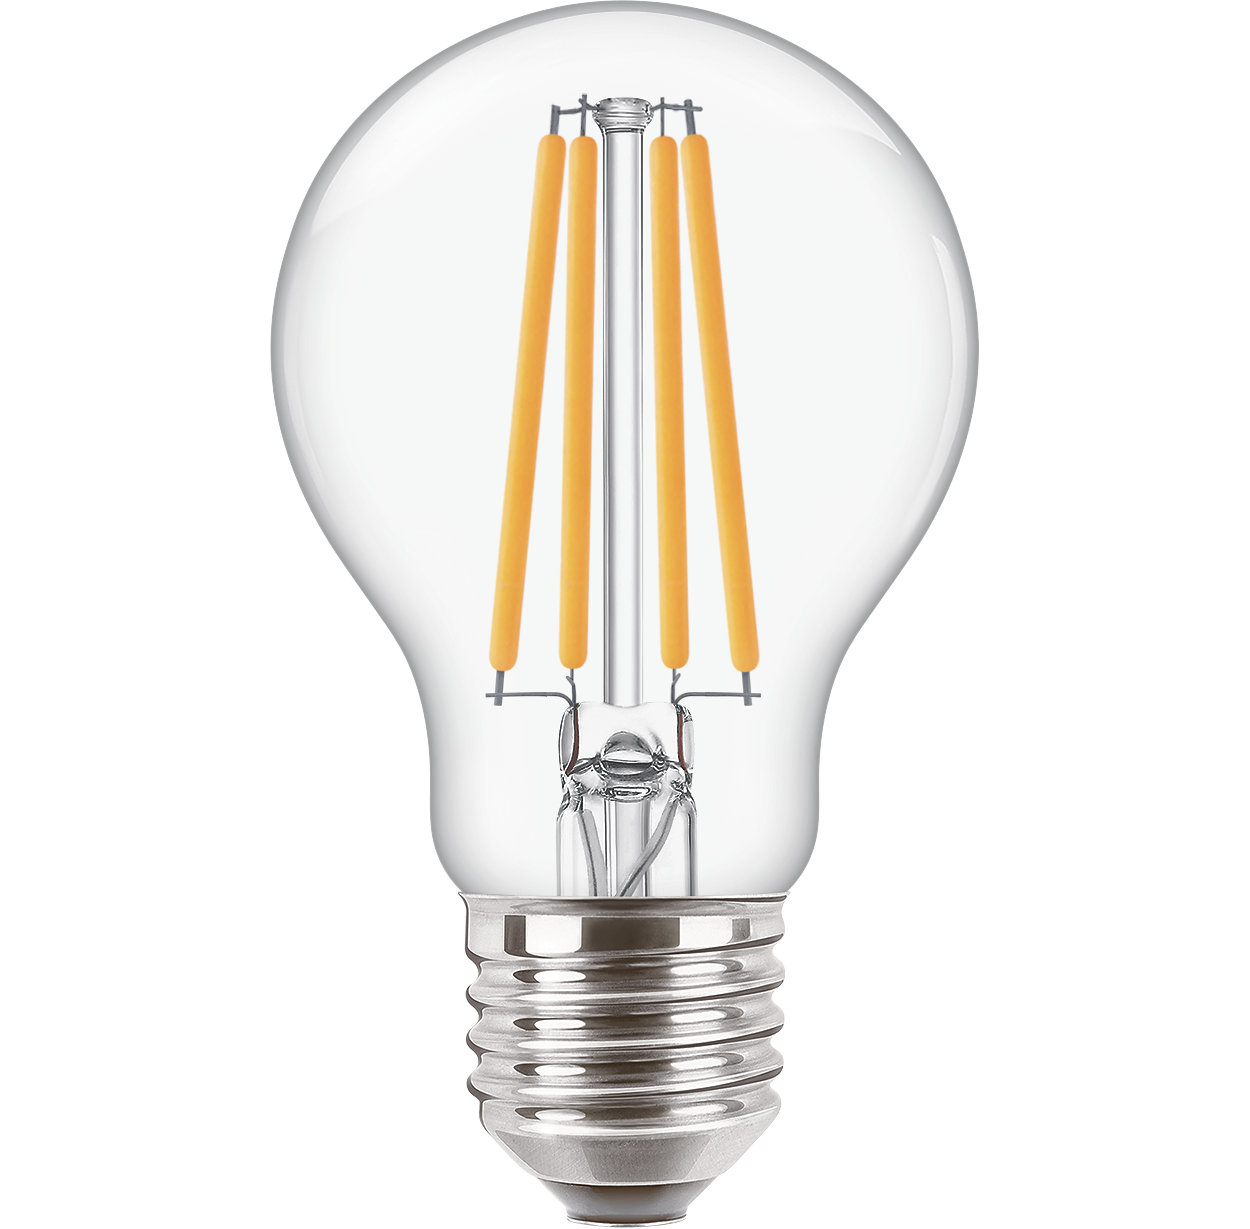 For your everyday lighting jobs, CorePro LED combines the familiar shapes of classic incandescent bulbs with the benefits of long-lasting LED technology